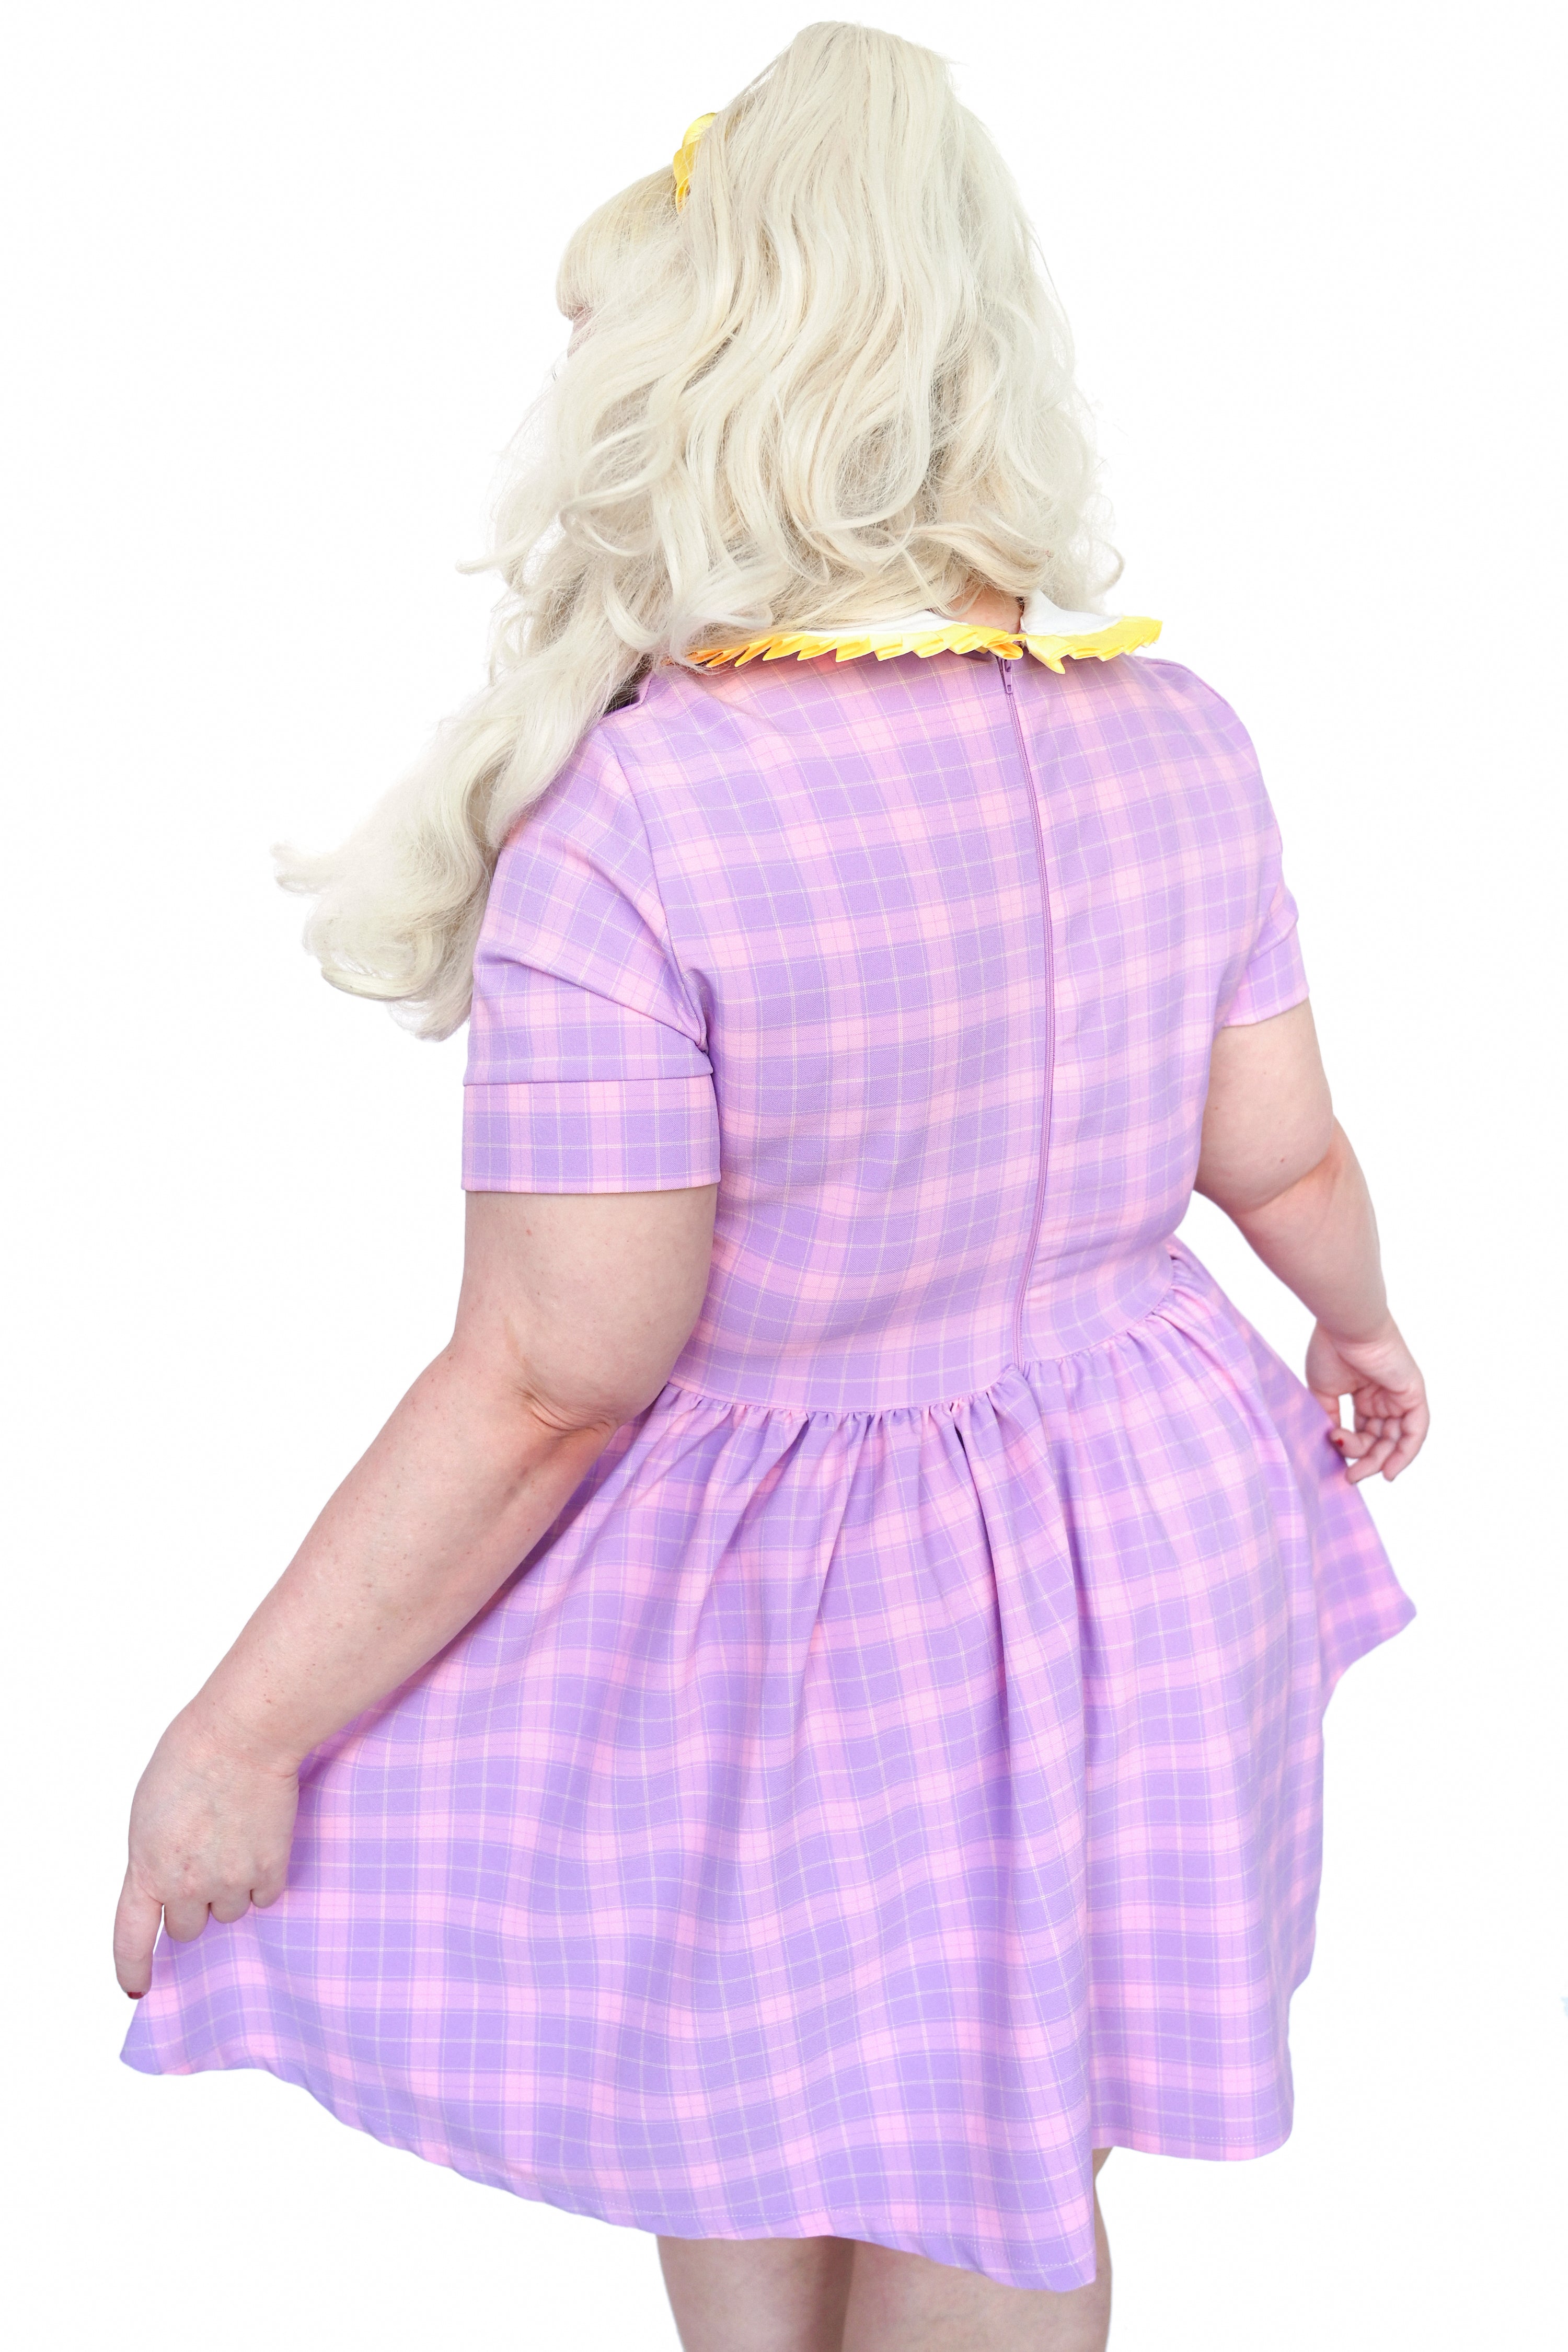 Charmed Collared Dress - Sizes XS/S/M left!